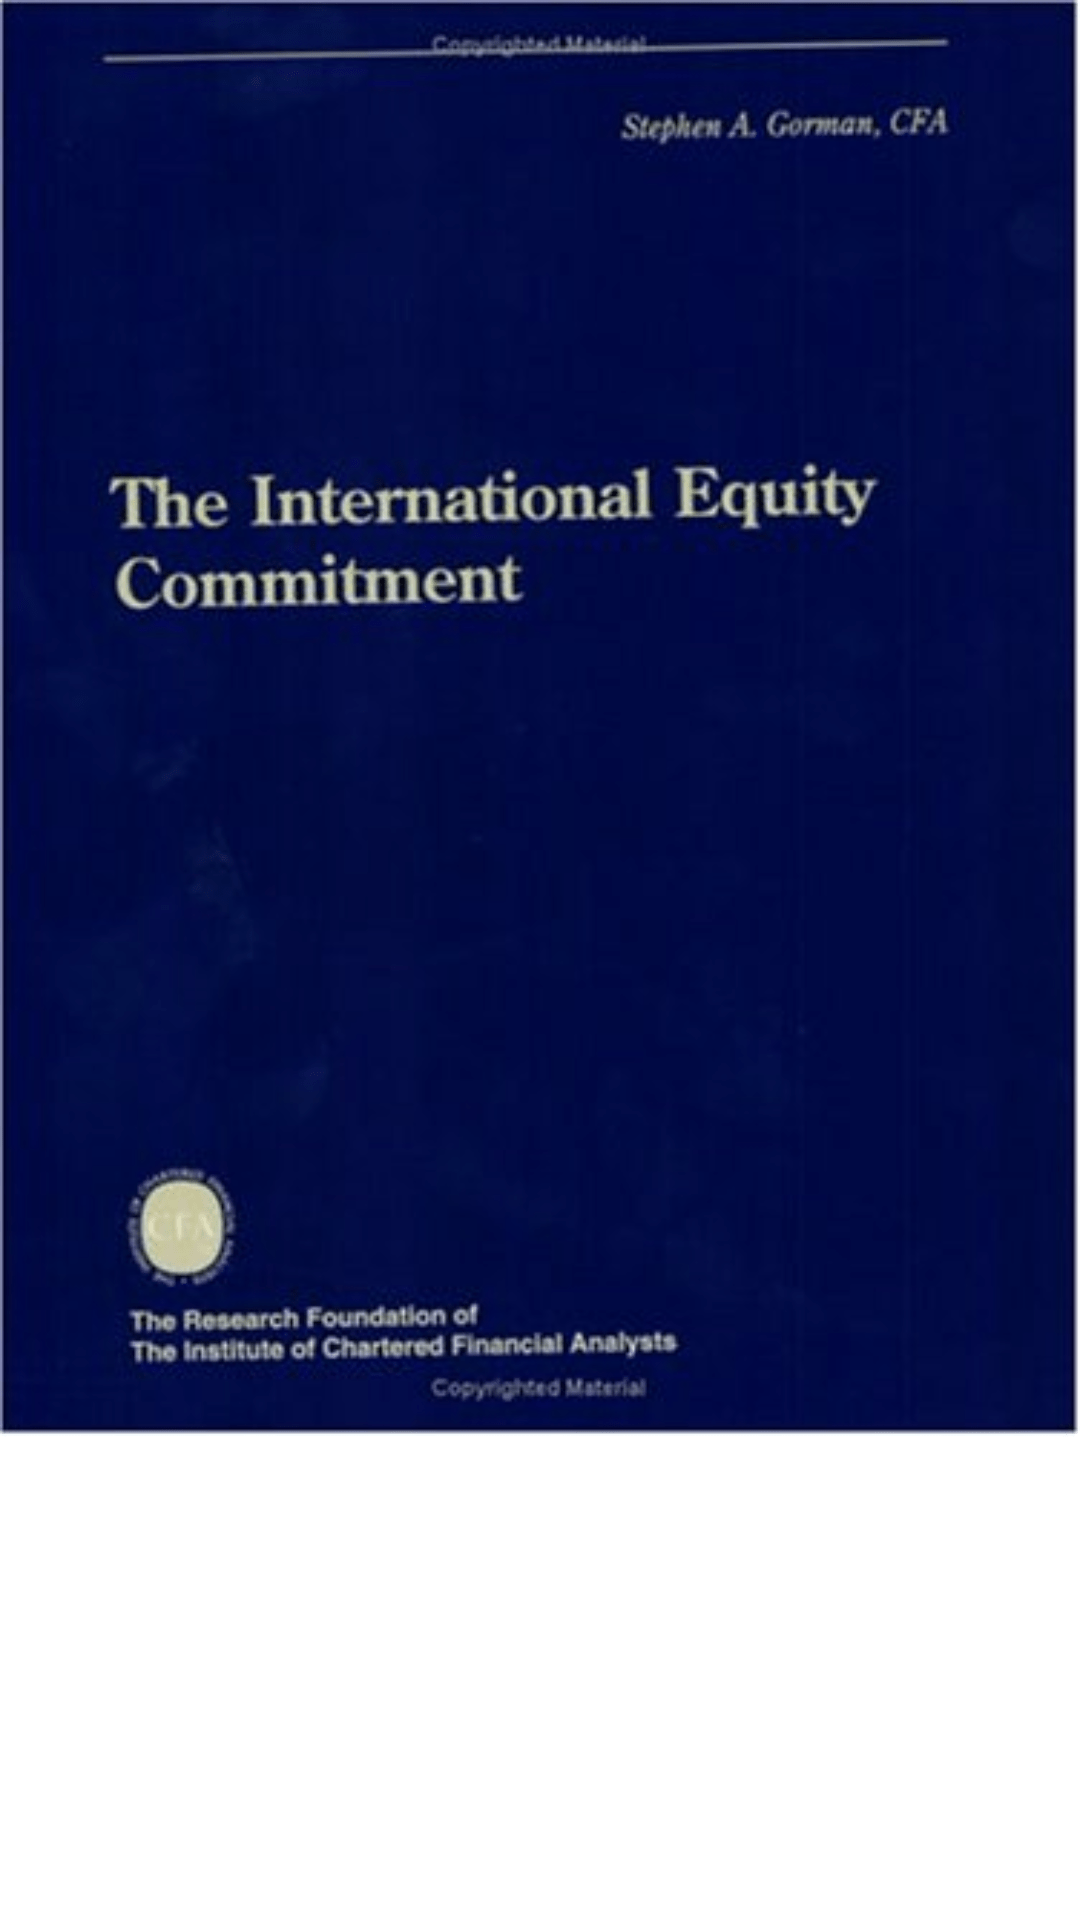 The International Equity Commitment